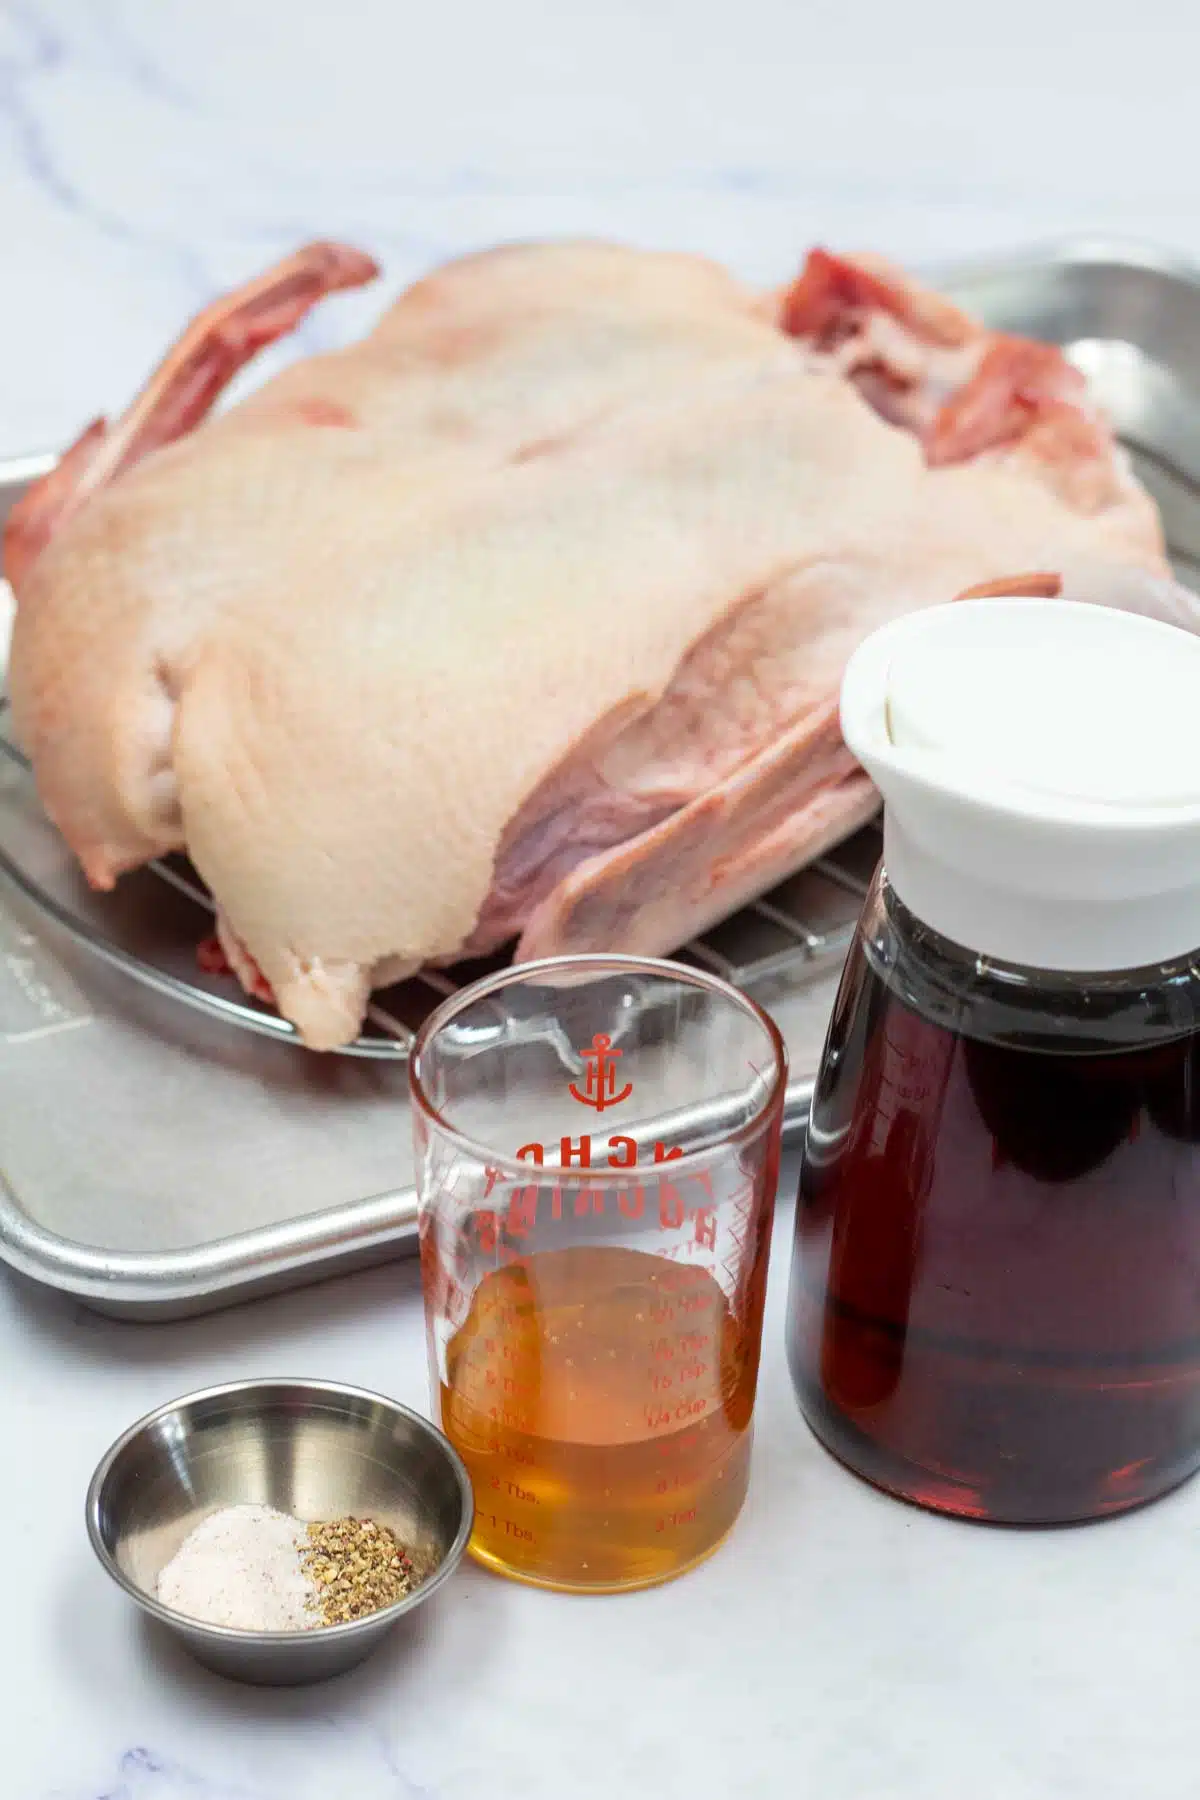 Tall image showing ingredients needed for smoked duck.